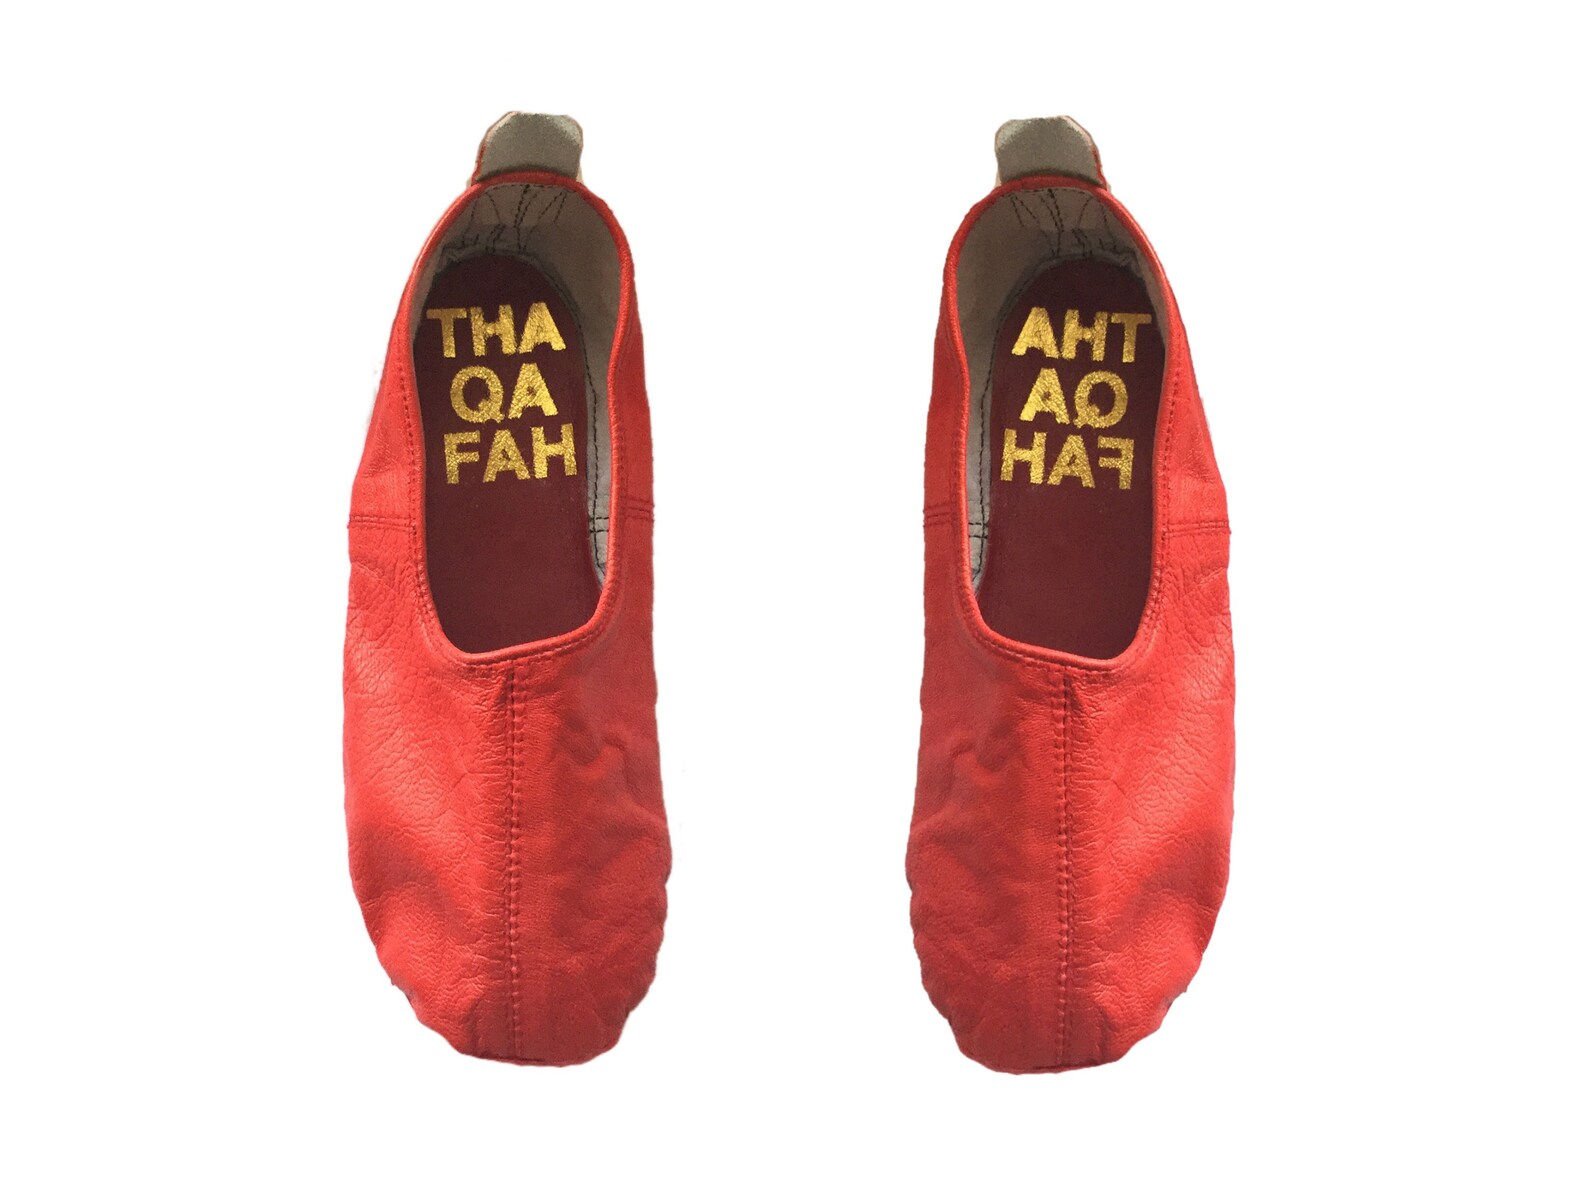 red leather flats, leather slippers, house shoes, gift for her,leather travel shoes, tabi socks ,ballet flats,loafers,